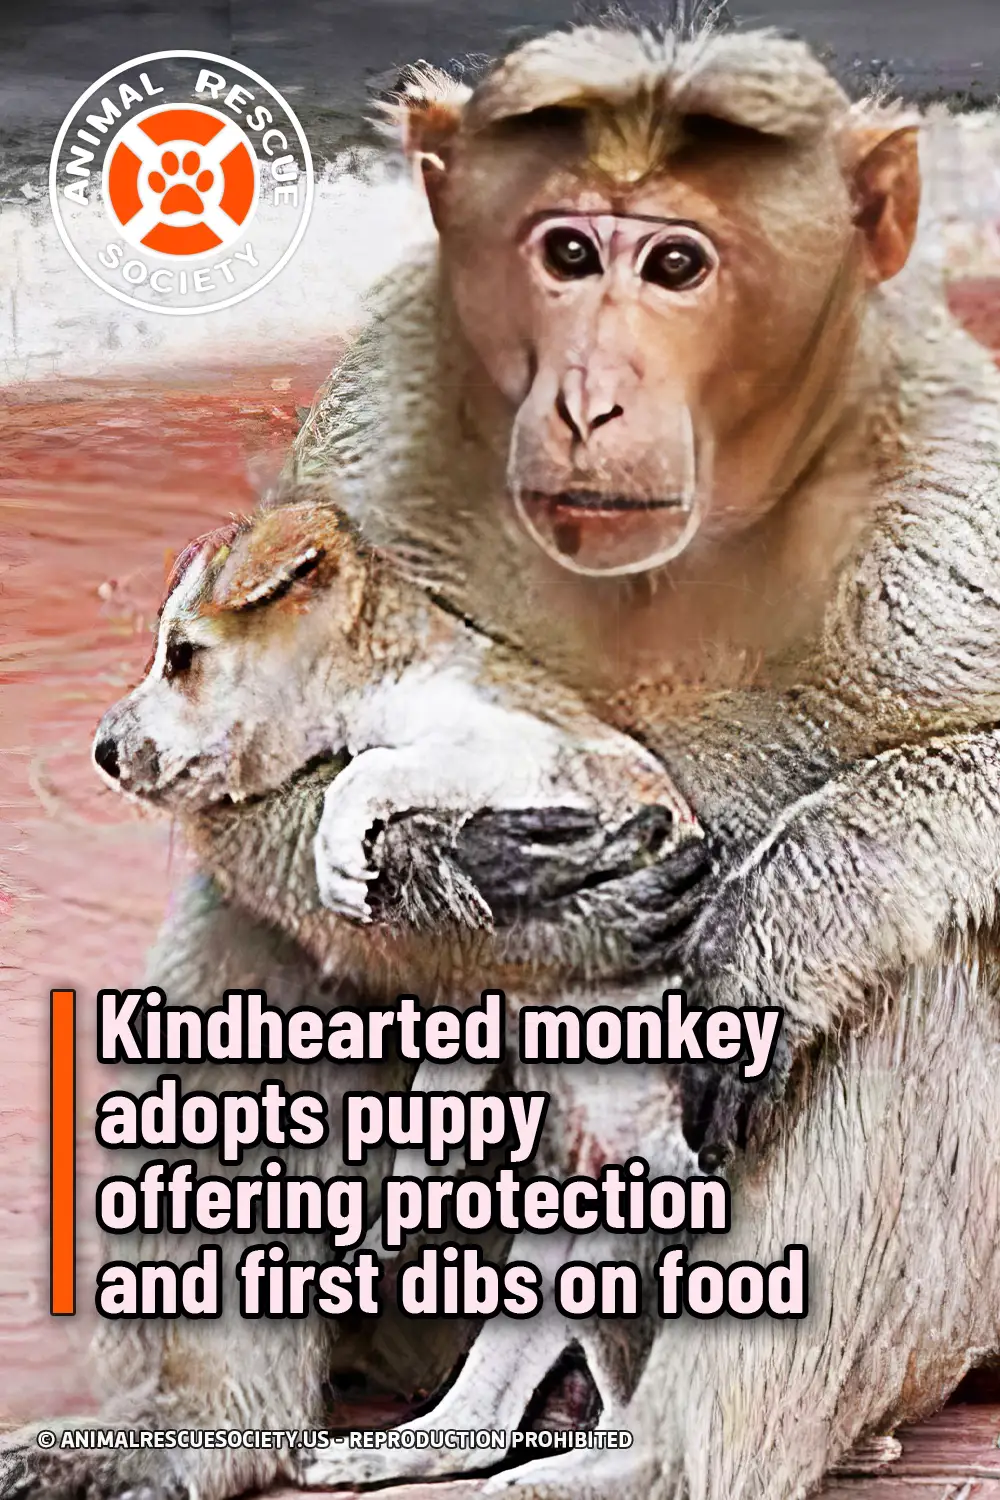 Kindhearted monkey adopts puppy offering protection and first dibs on food